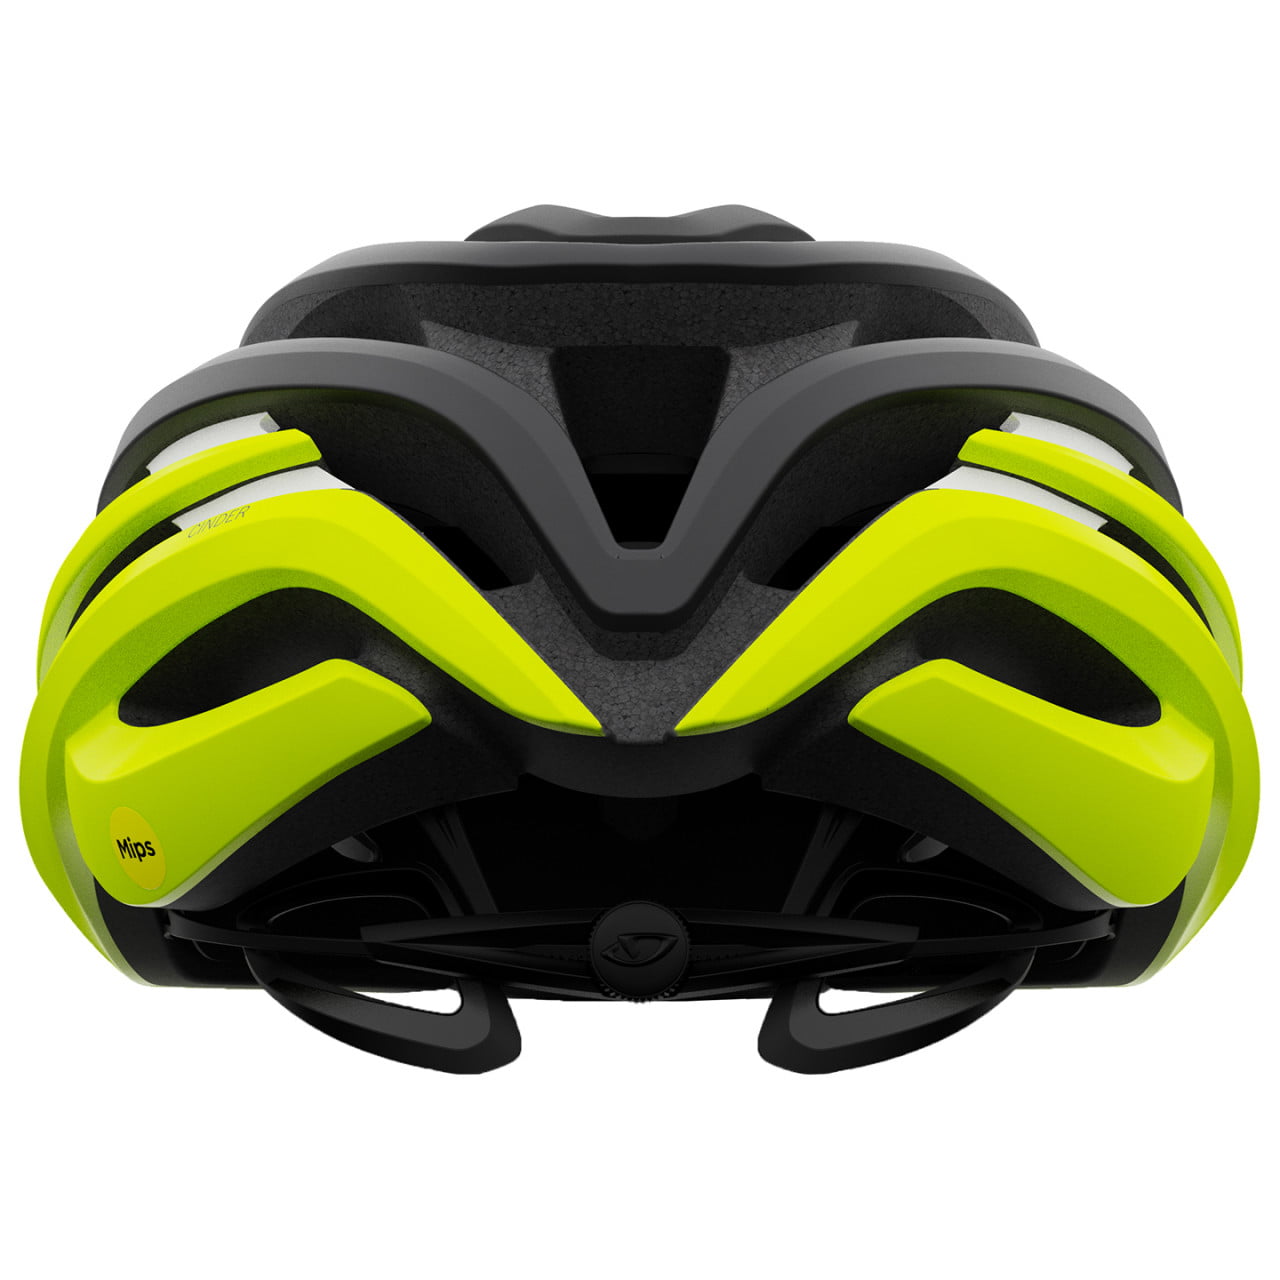 Casque route Cinder Mips